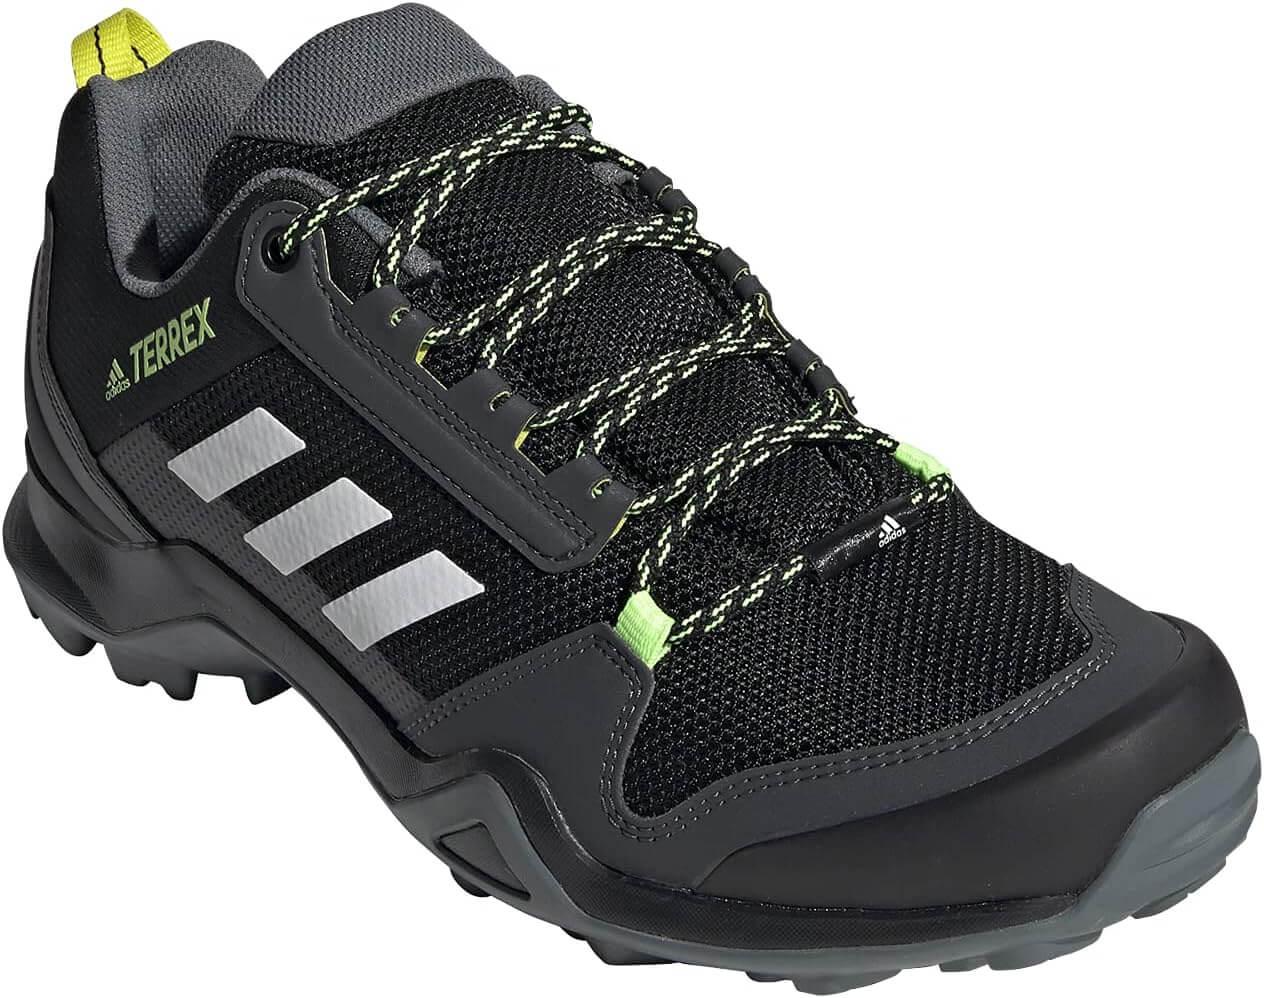 Shop The Latest >adidas Outdoor Men's Terrex Ax3 Trail Running Shoe > *Only $120.66*> From The Top Brand > *adidasl* > Shop Now and Get Free Shipping On Orders Over $45.00 >*Shop Earth Foot*